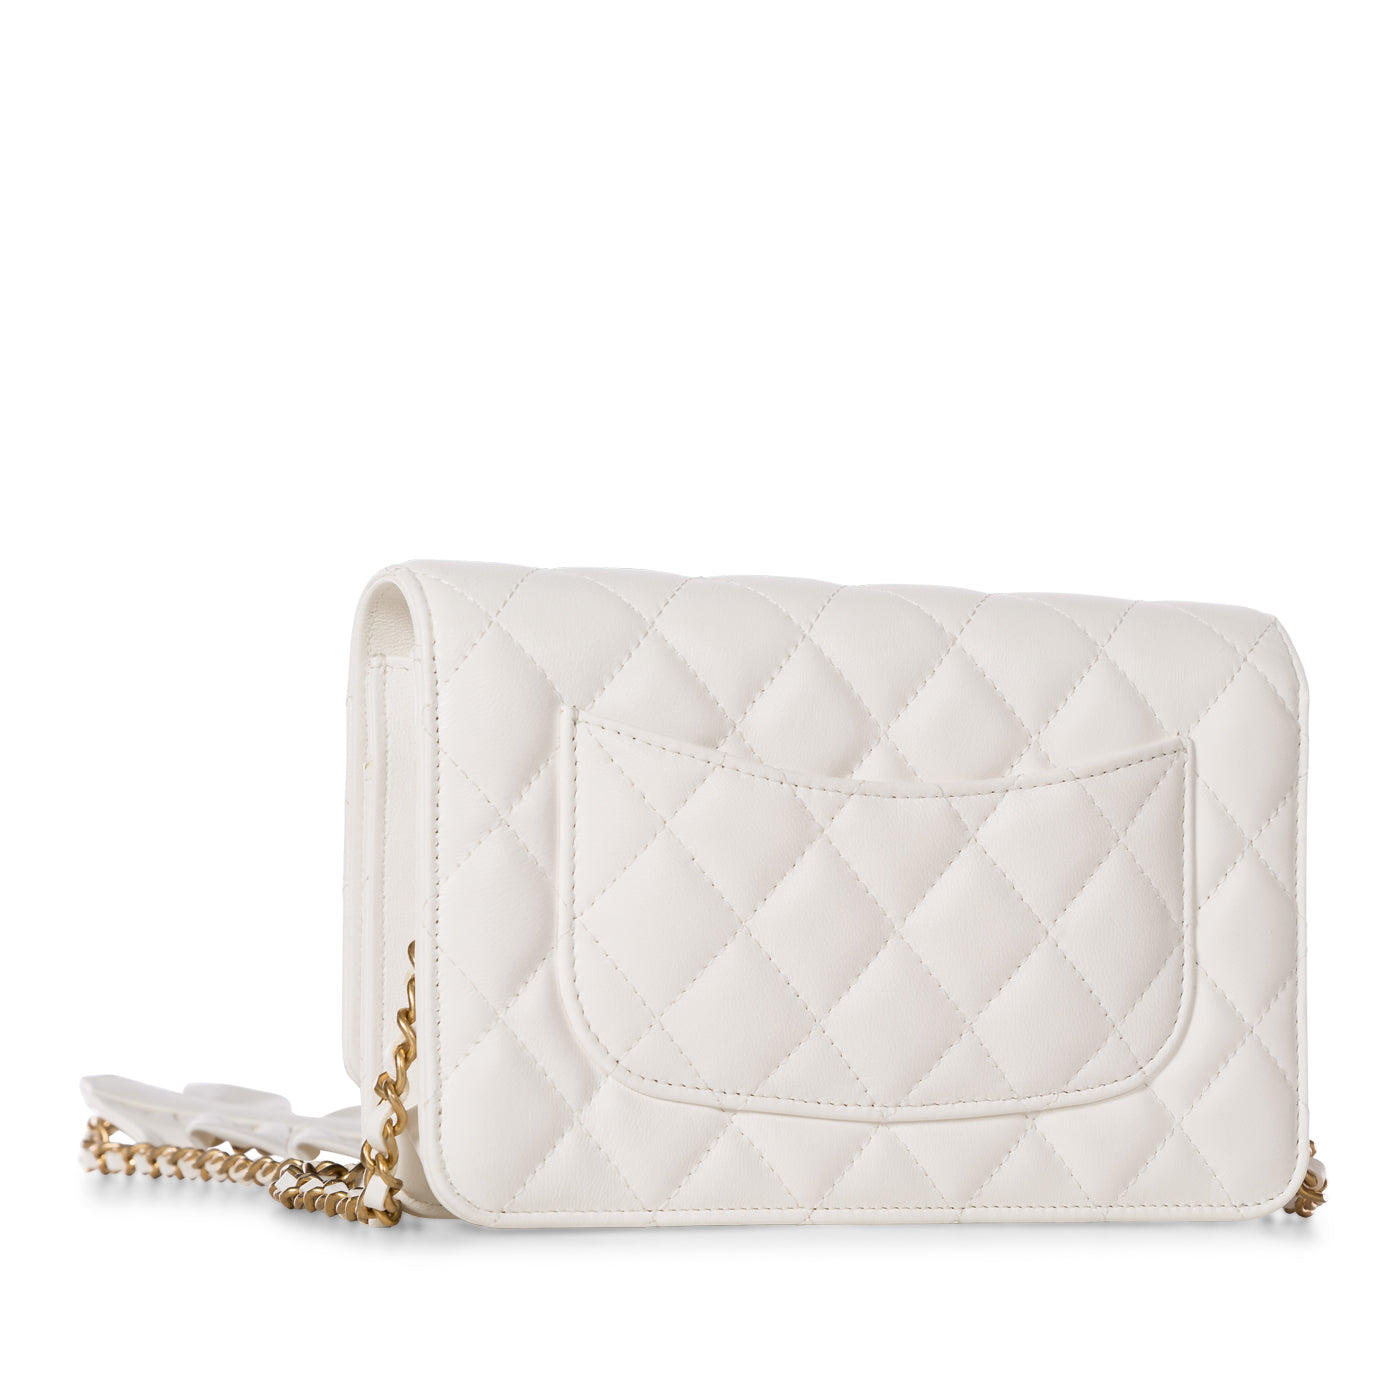 Chanel - WOC - Lambskin - White - AGHW - Fringed Leather Shoulder Strap